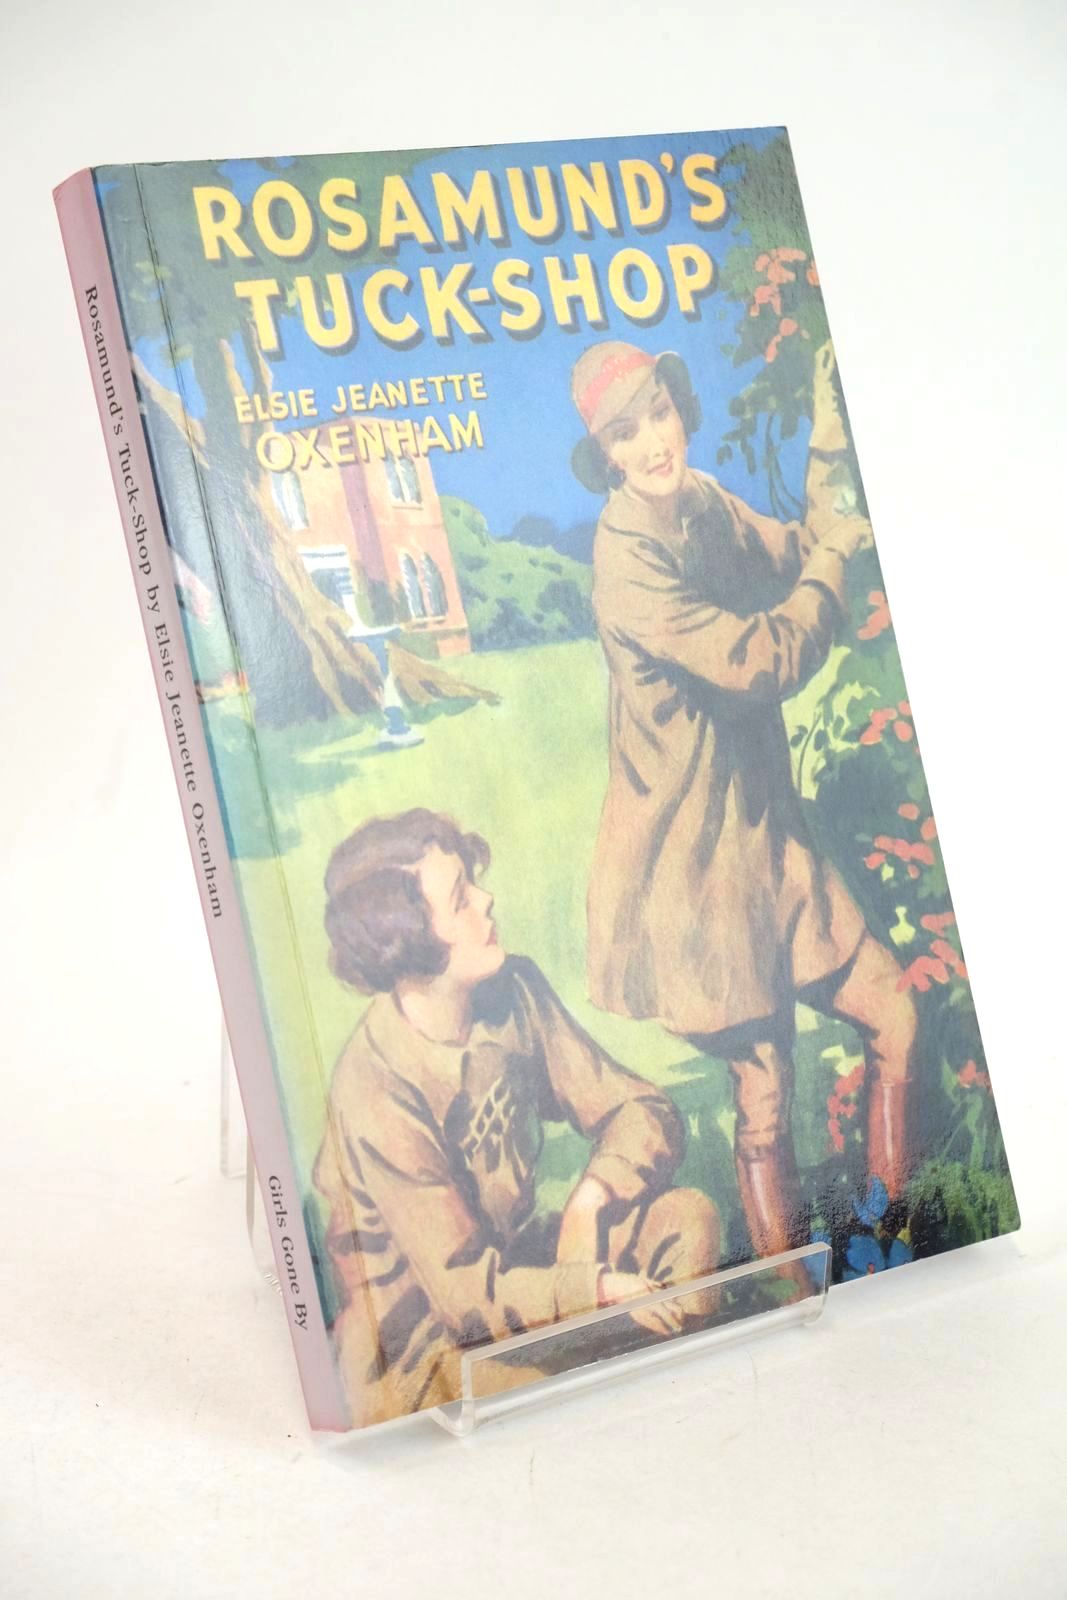 Photo of ROSAMUND'S TUCK-SHOP written by Oxenham, Elsie J. published by Girls Gone By (STOCK CODE: 1326838)  for sale by Stella & Rose's Books